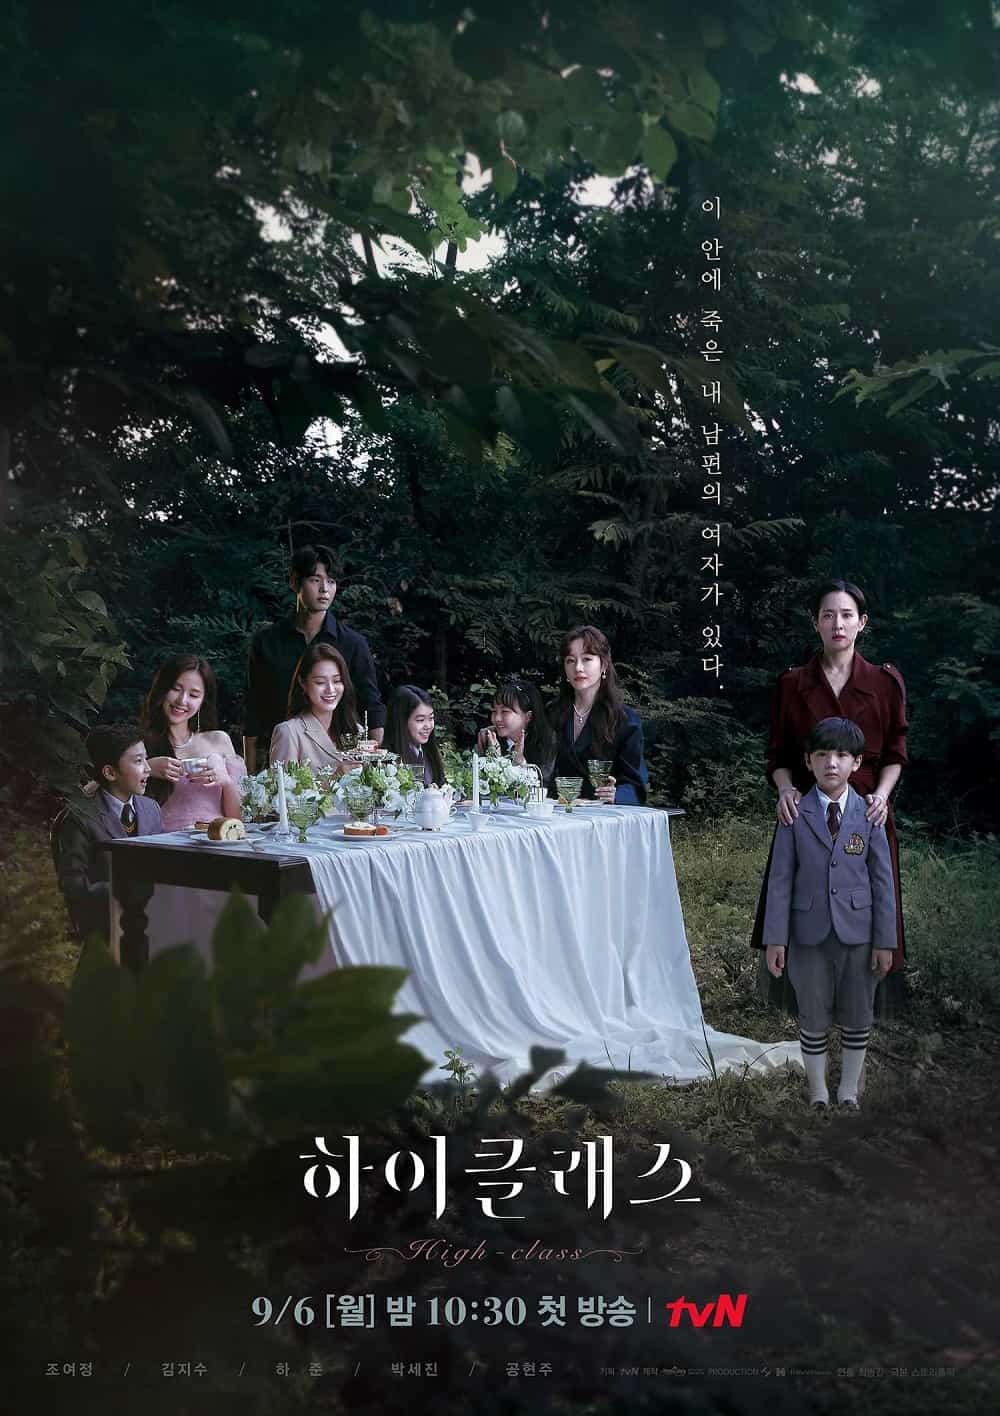 High Class- Cast, Summary, Synopsis, OST, Episode, Review